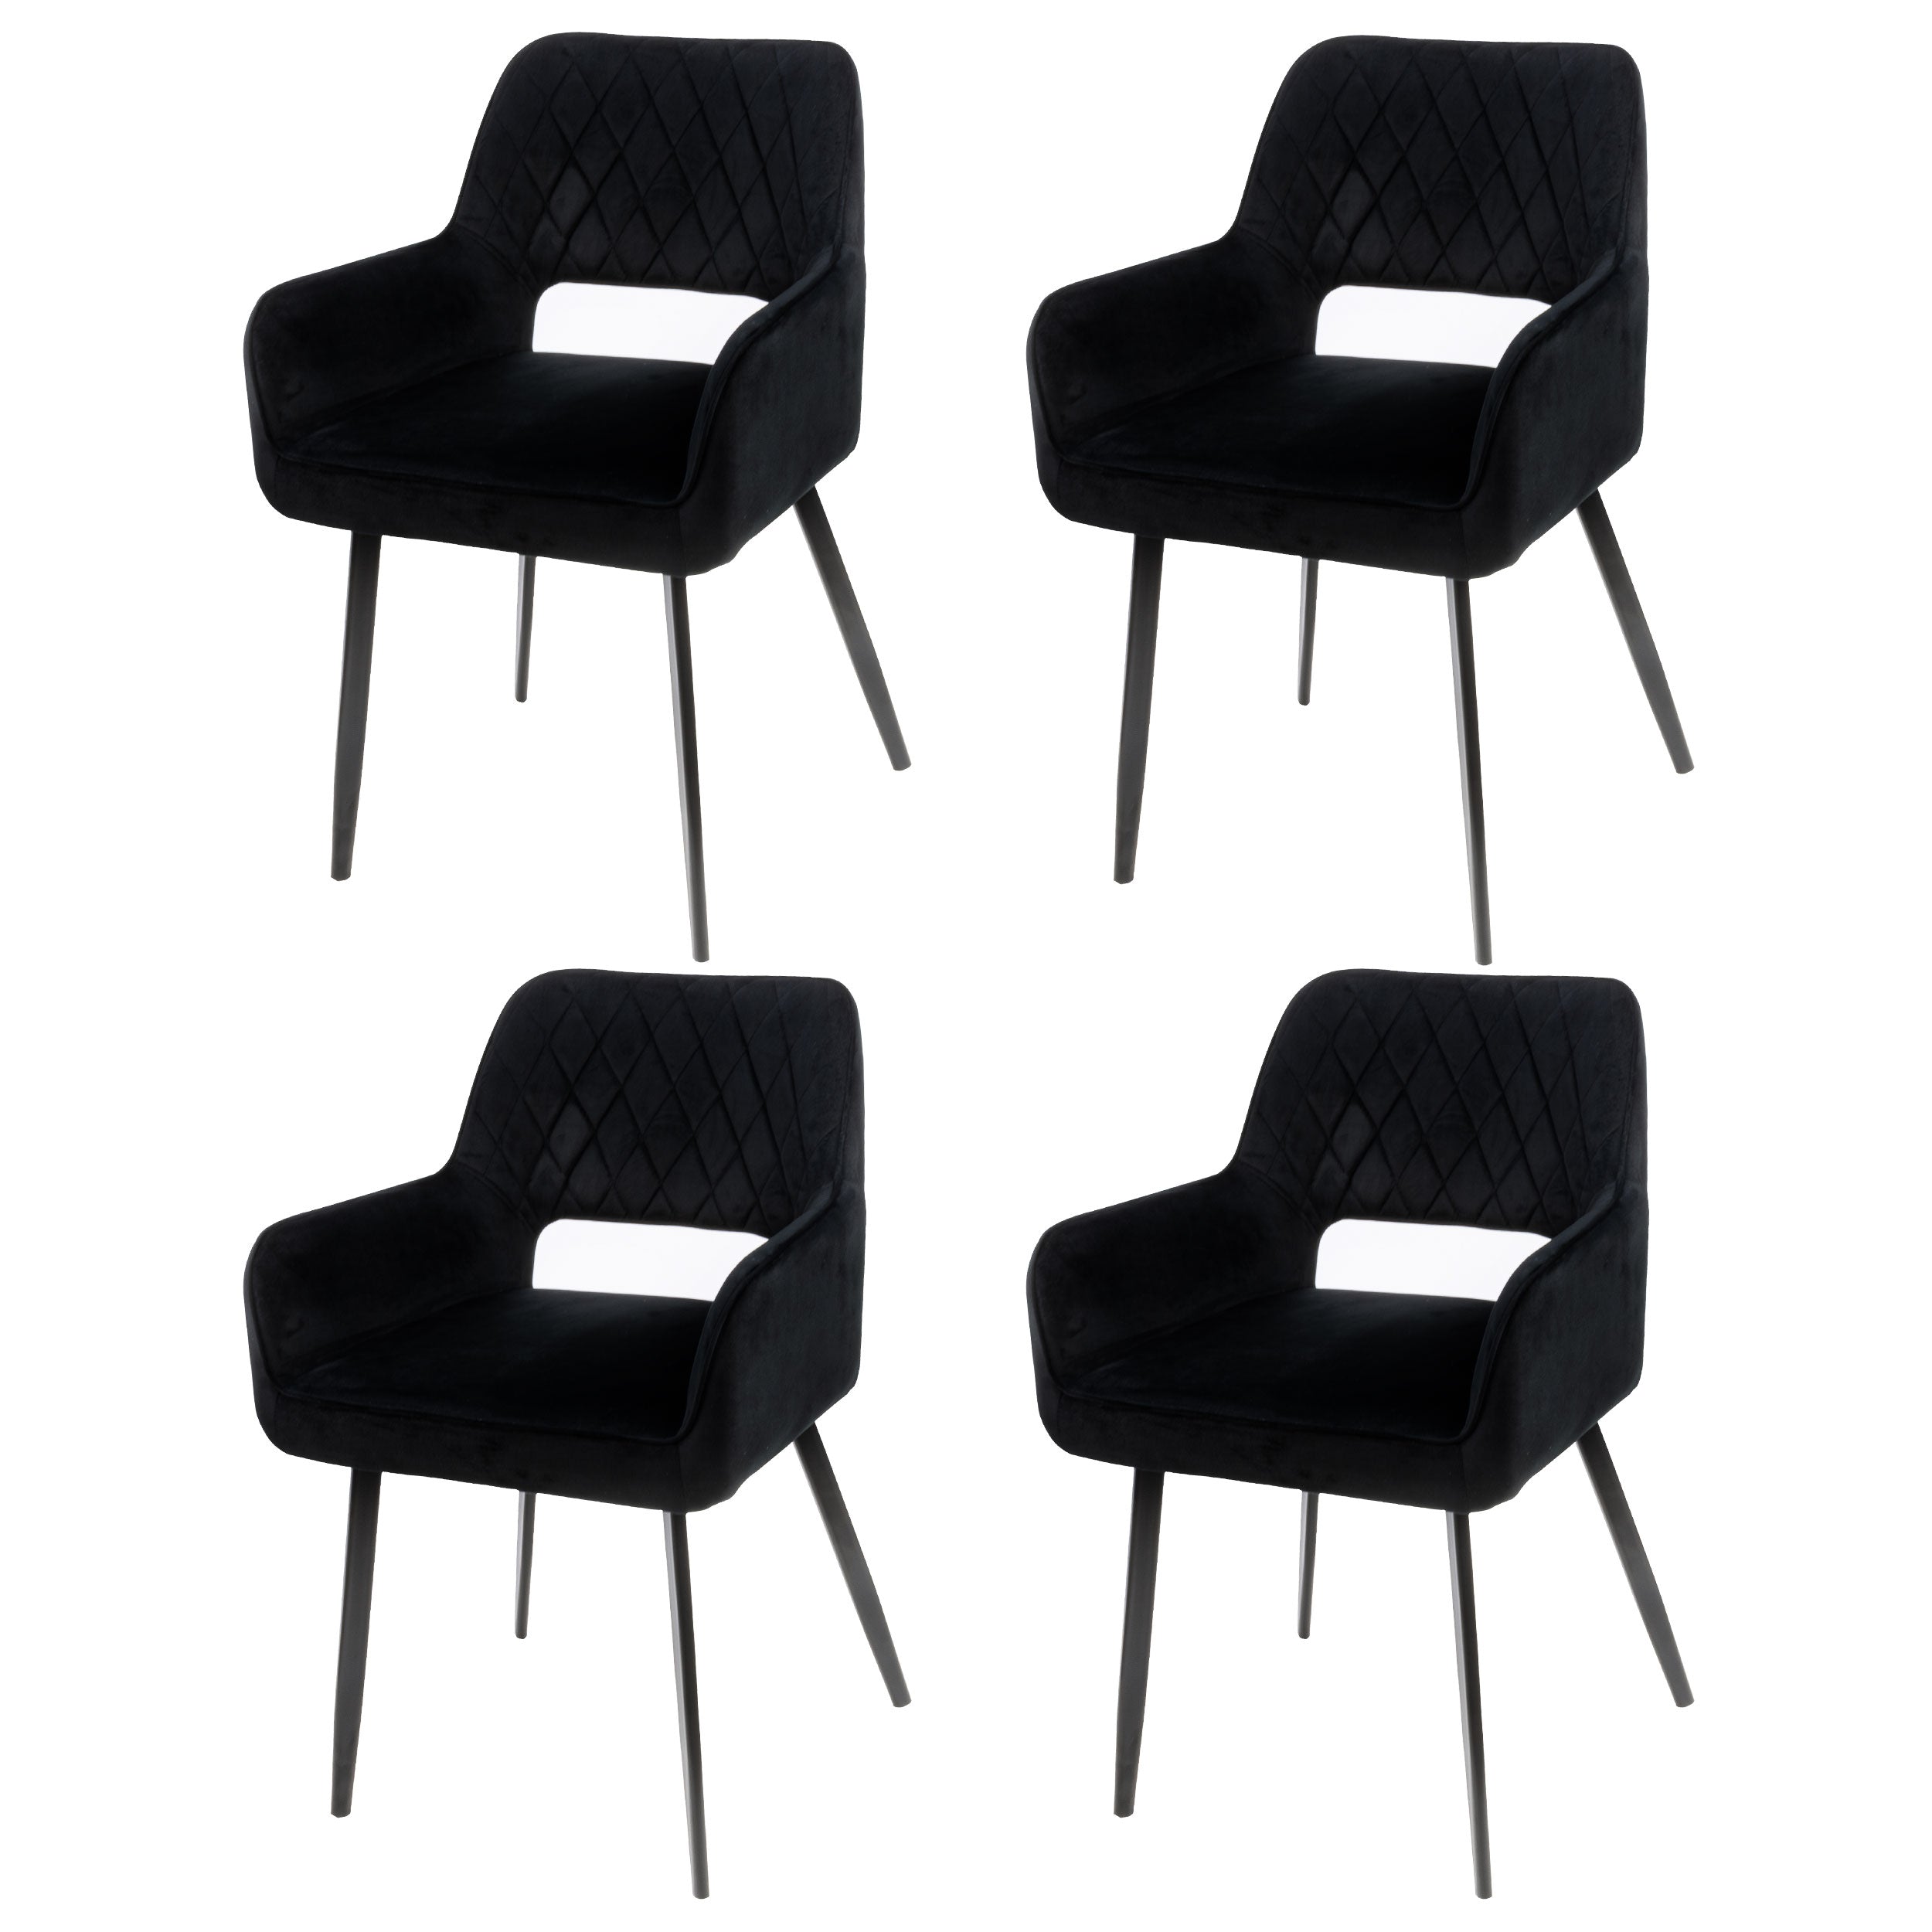 4 dining chairs set